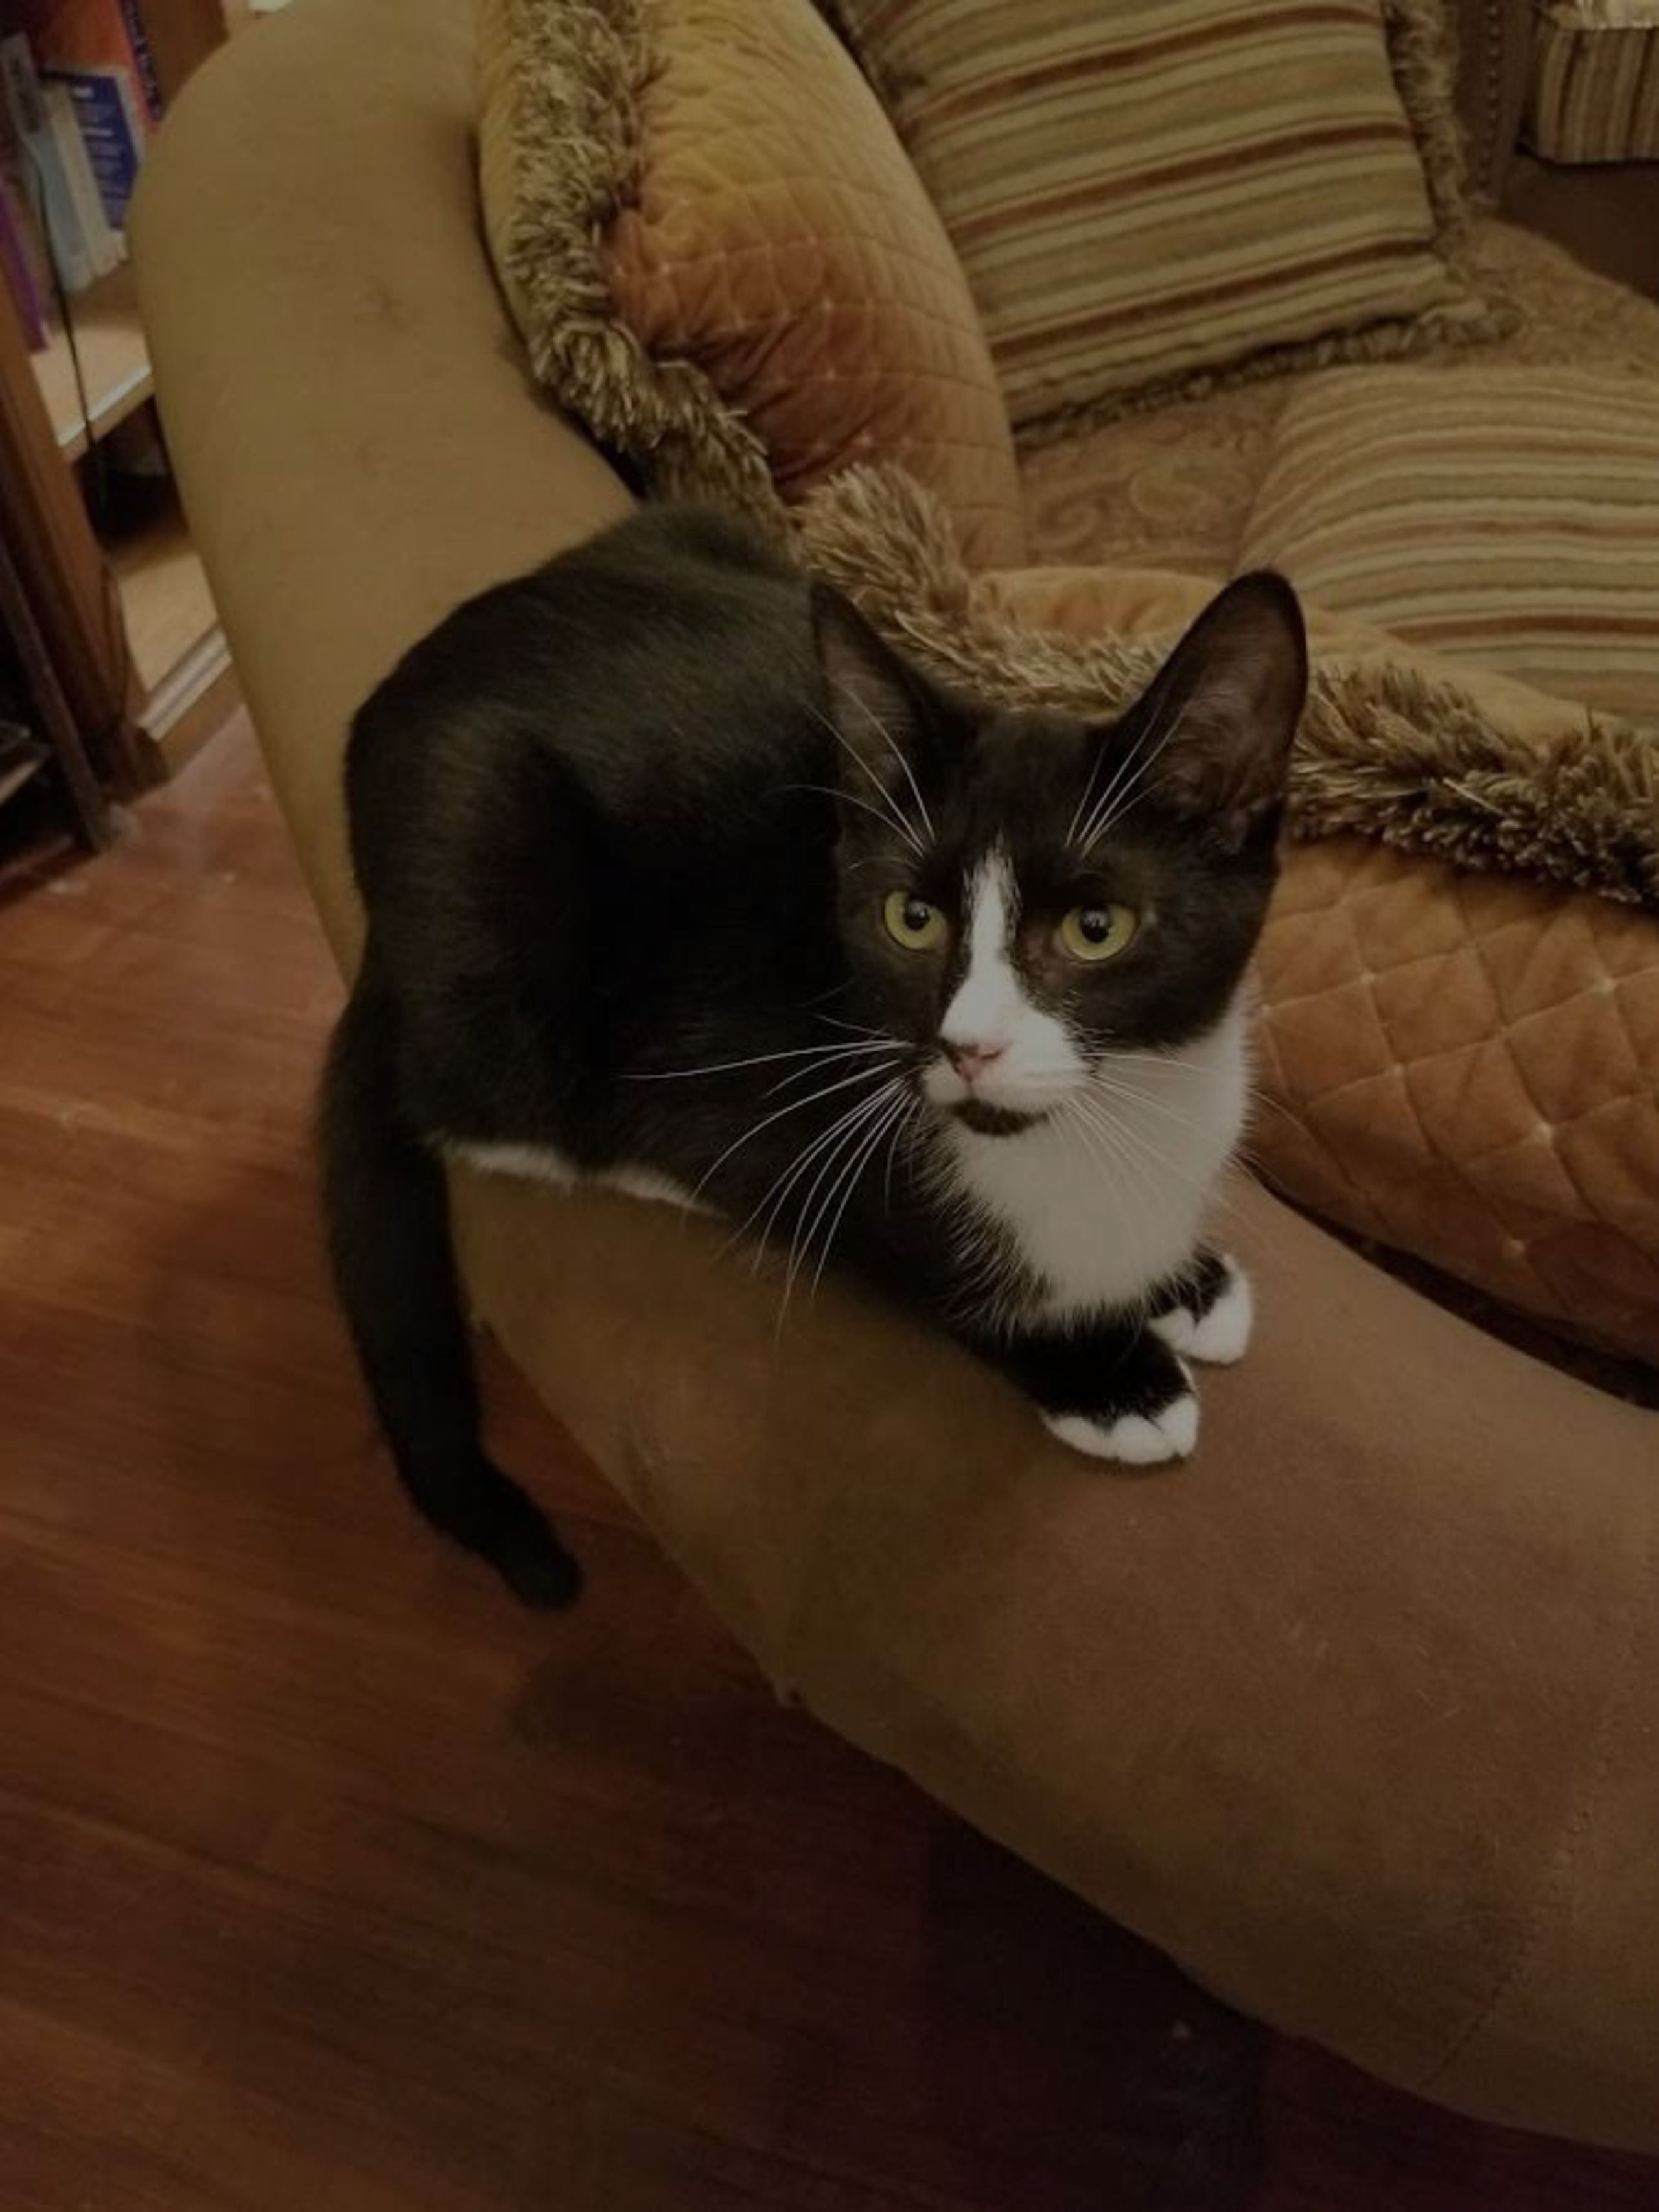 Teriyaki is a fun and friendly kitten who adores playing with other cats